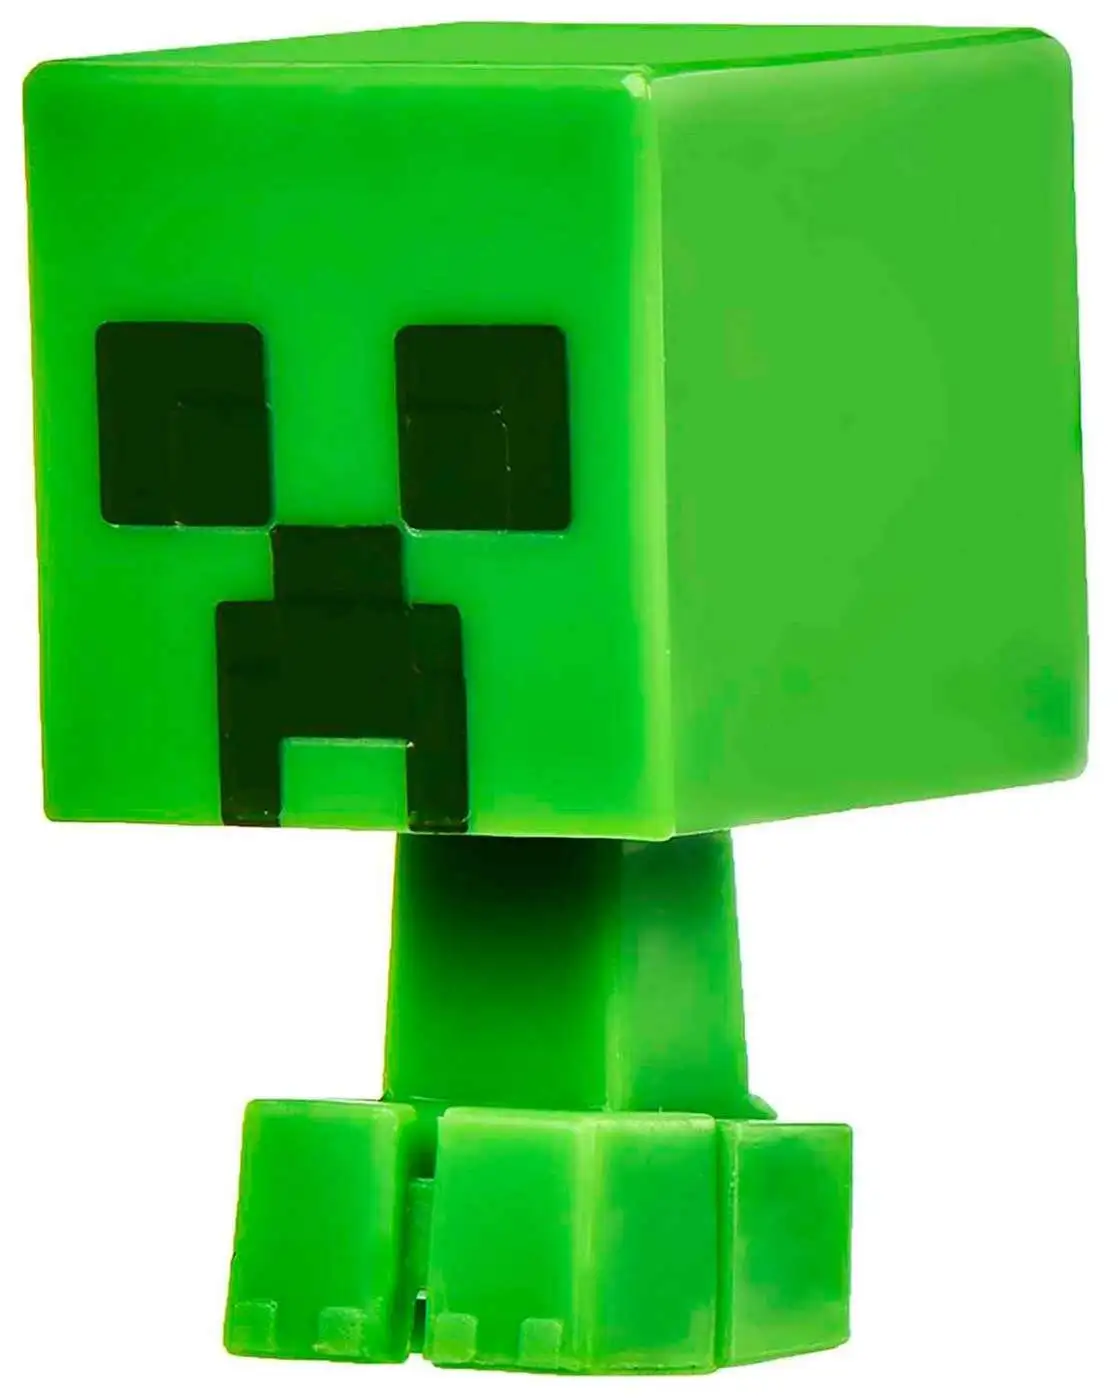 Minecraft Mini Figures 3-Pack - Potion Witch, Exploding Creeper